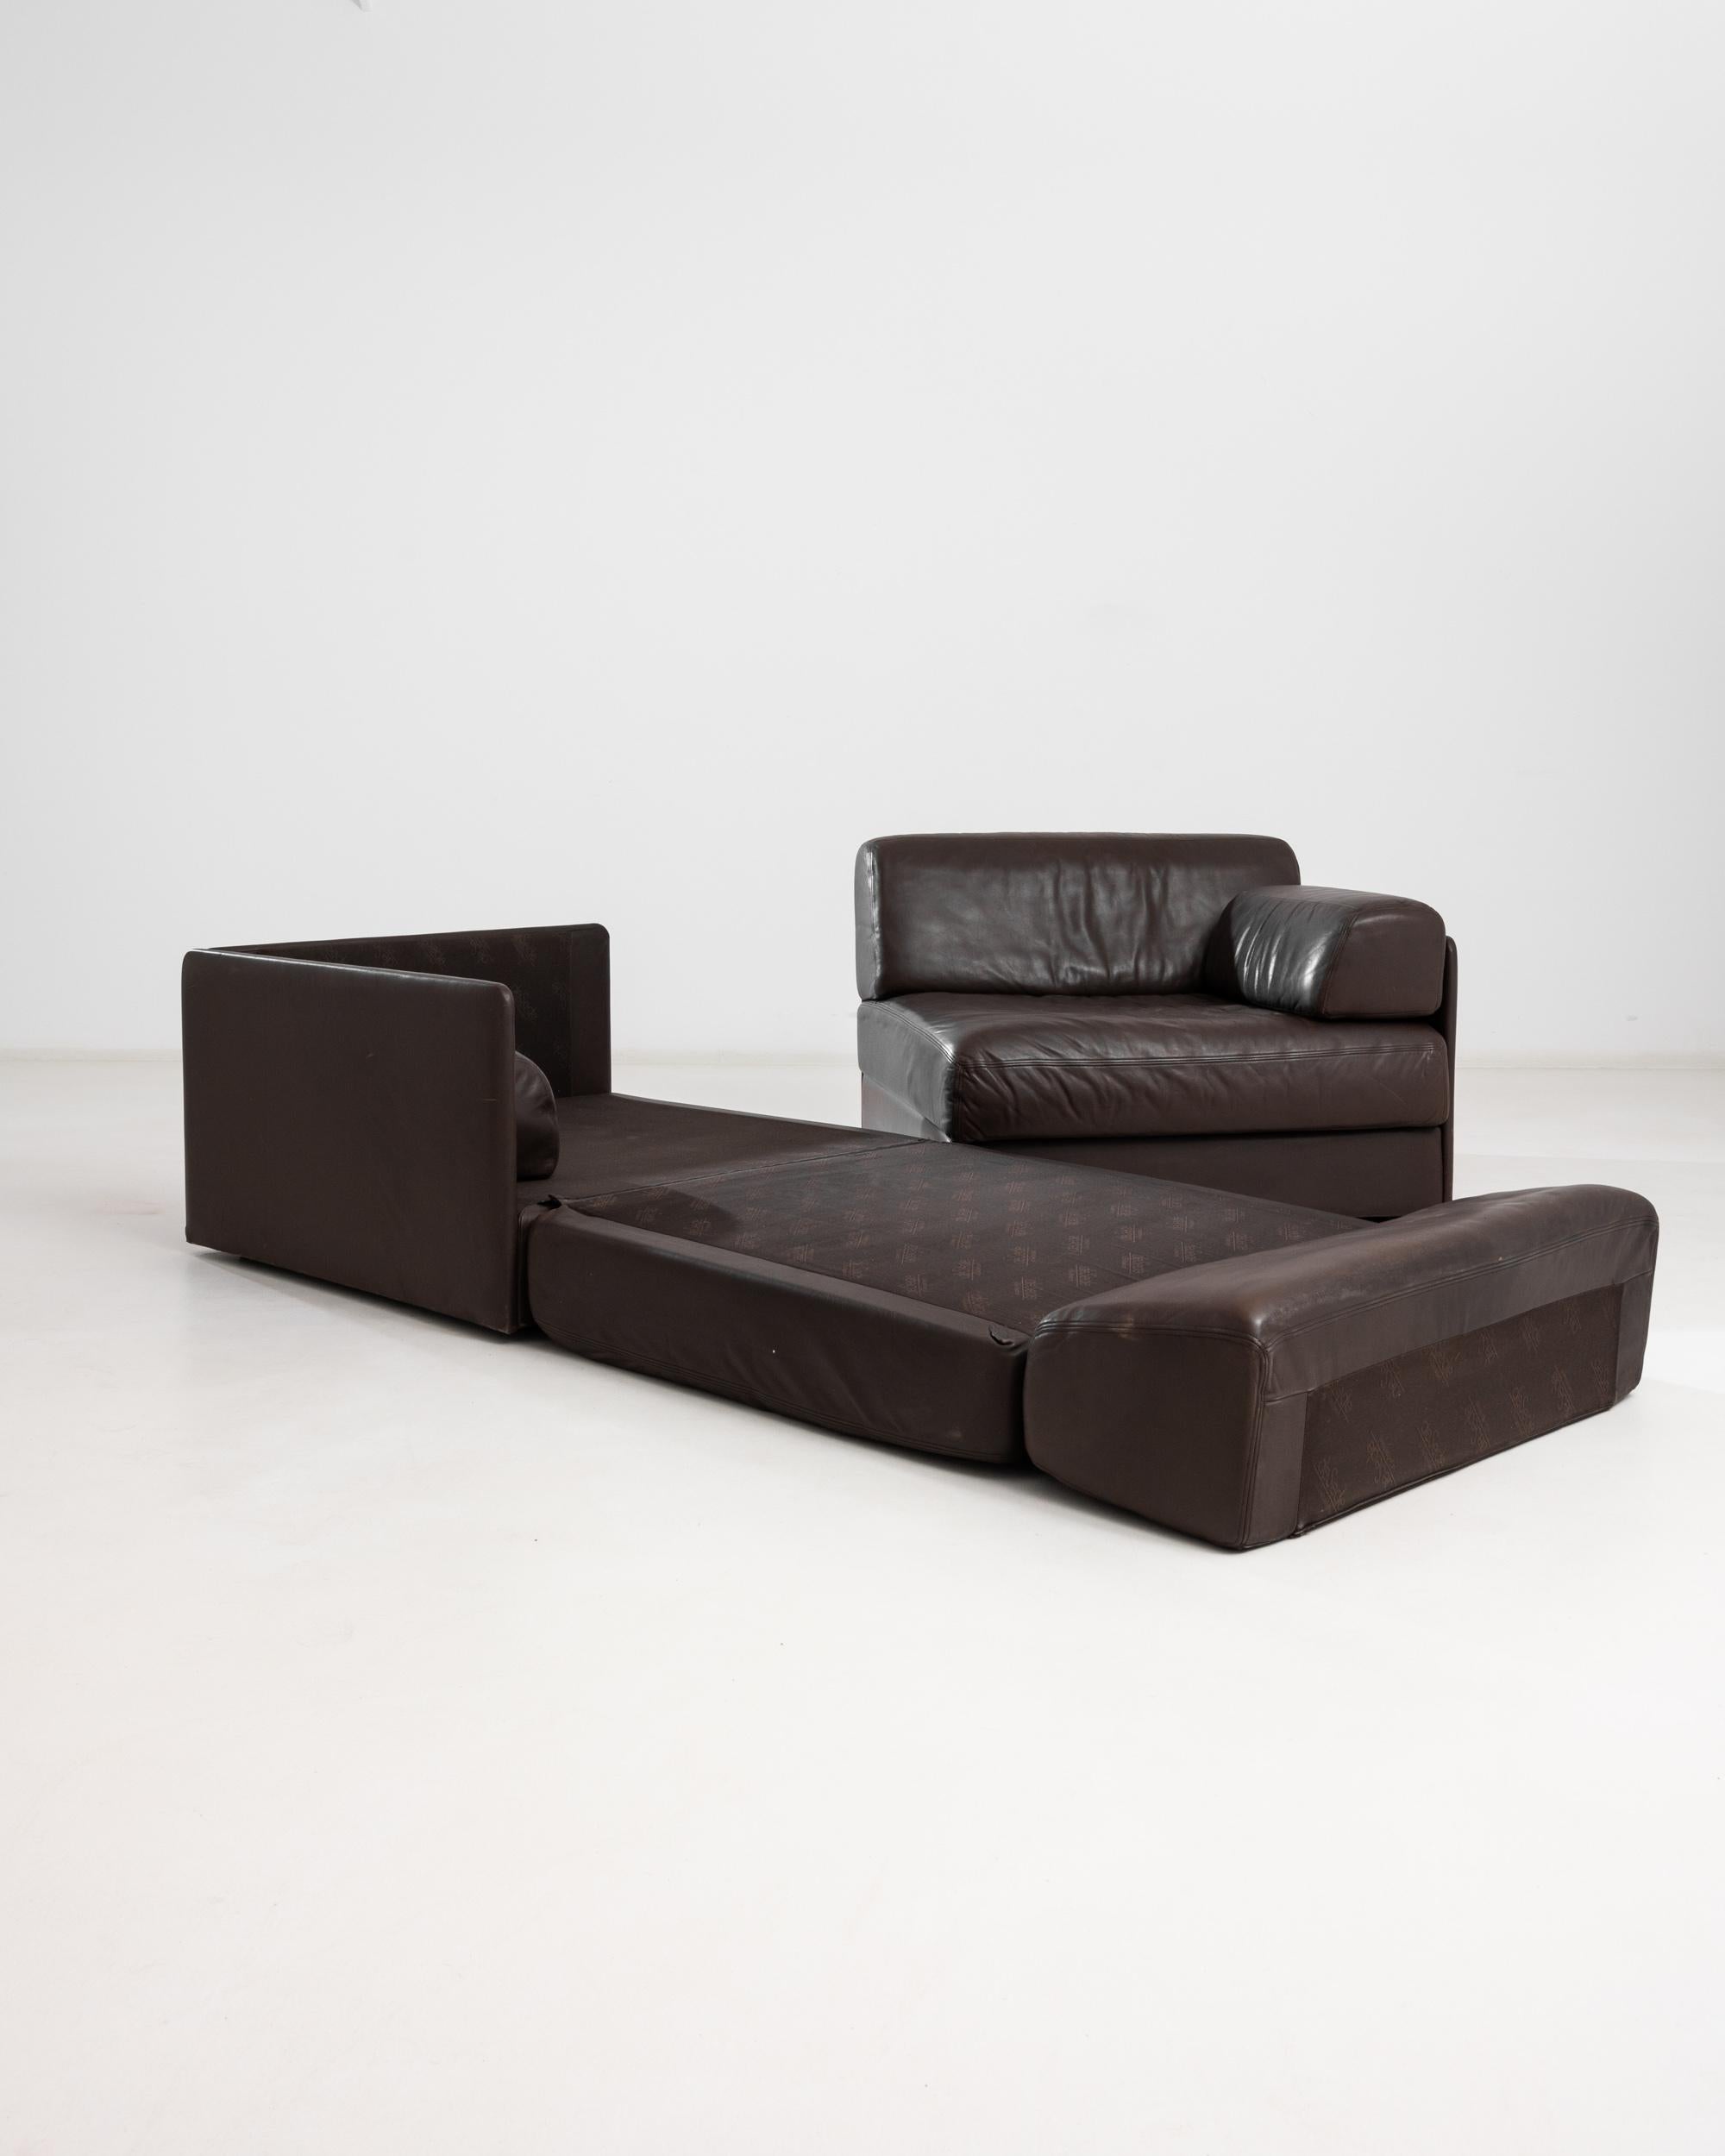 1970s Swiss Modular Leather Sofa DS76 by De Sede For Sale 5